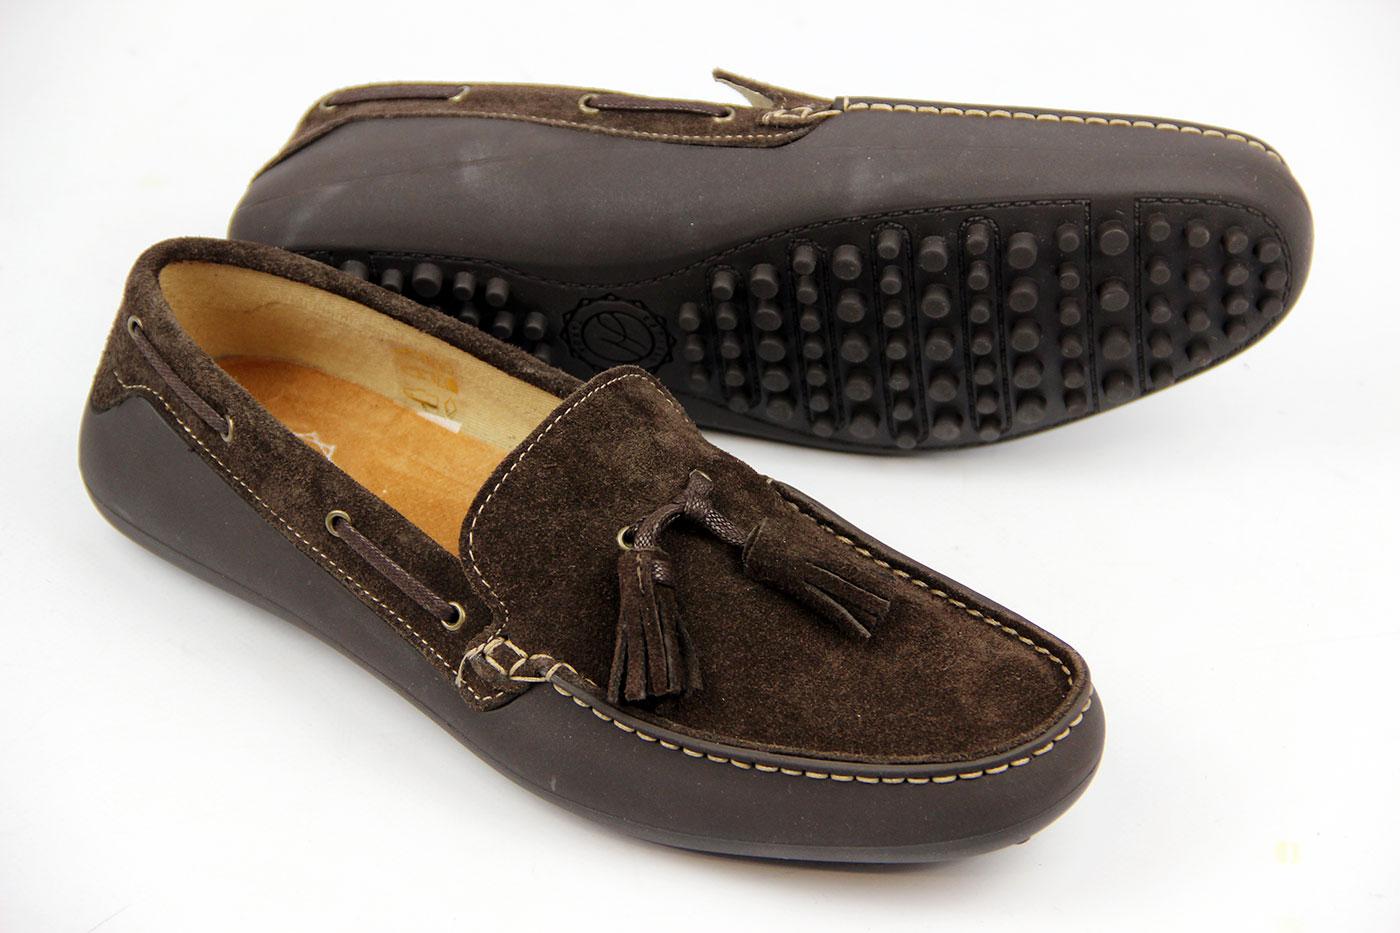 H by HUDSON Retro 60s Mod Suede Tassel Driving Shoes Brown